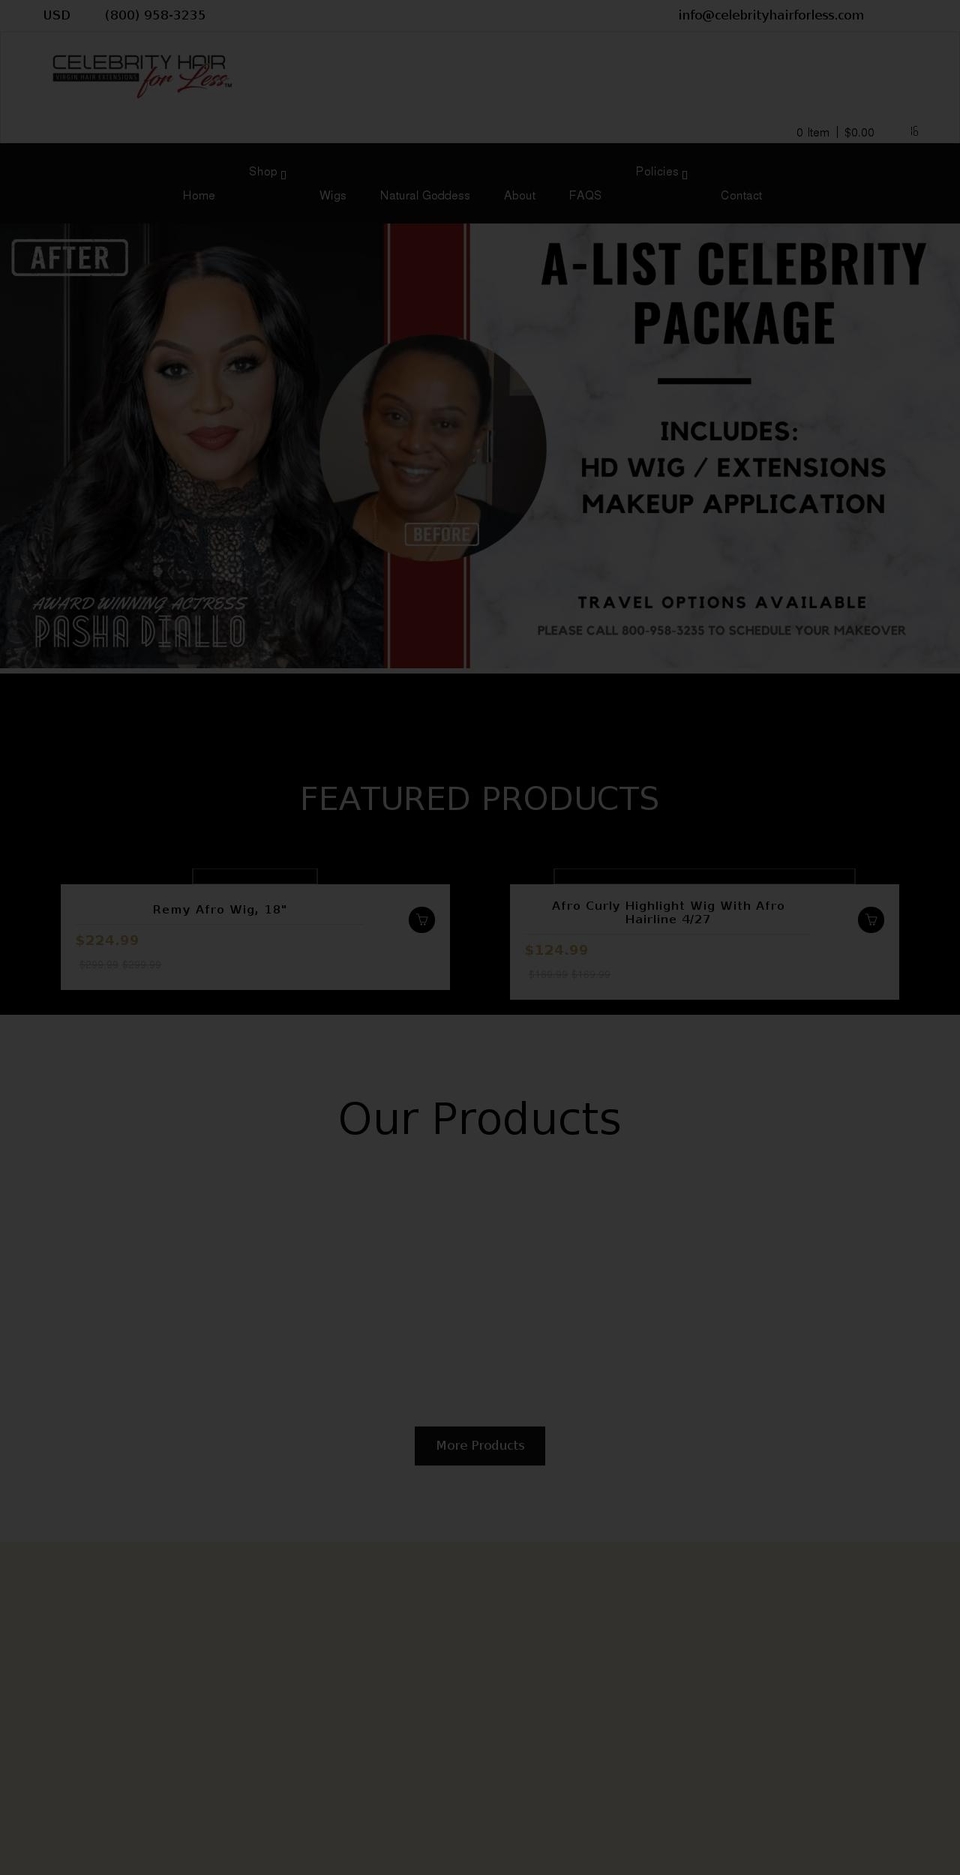 Triss Shopify theme site example celebrityhairforless.com